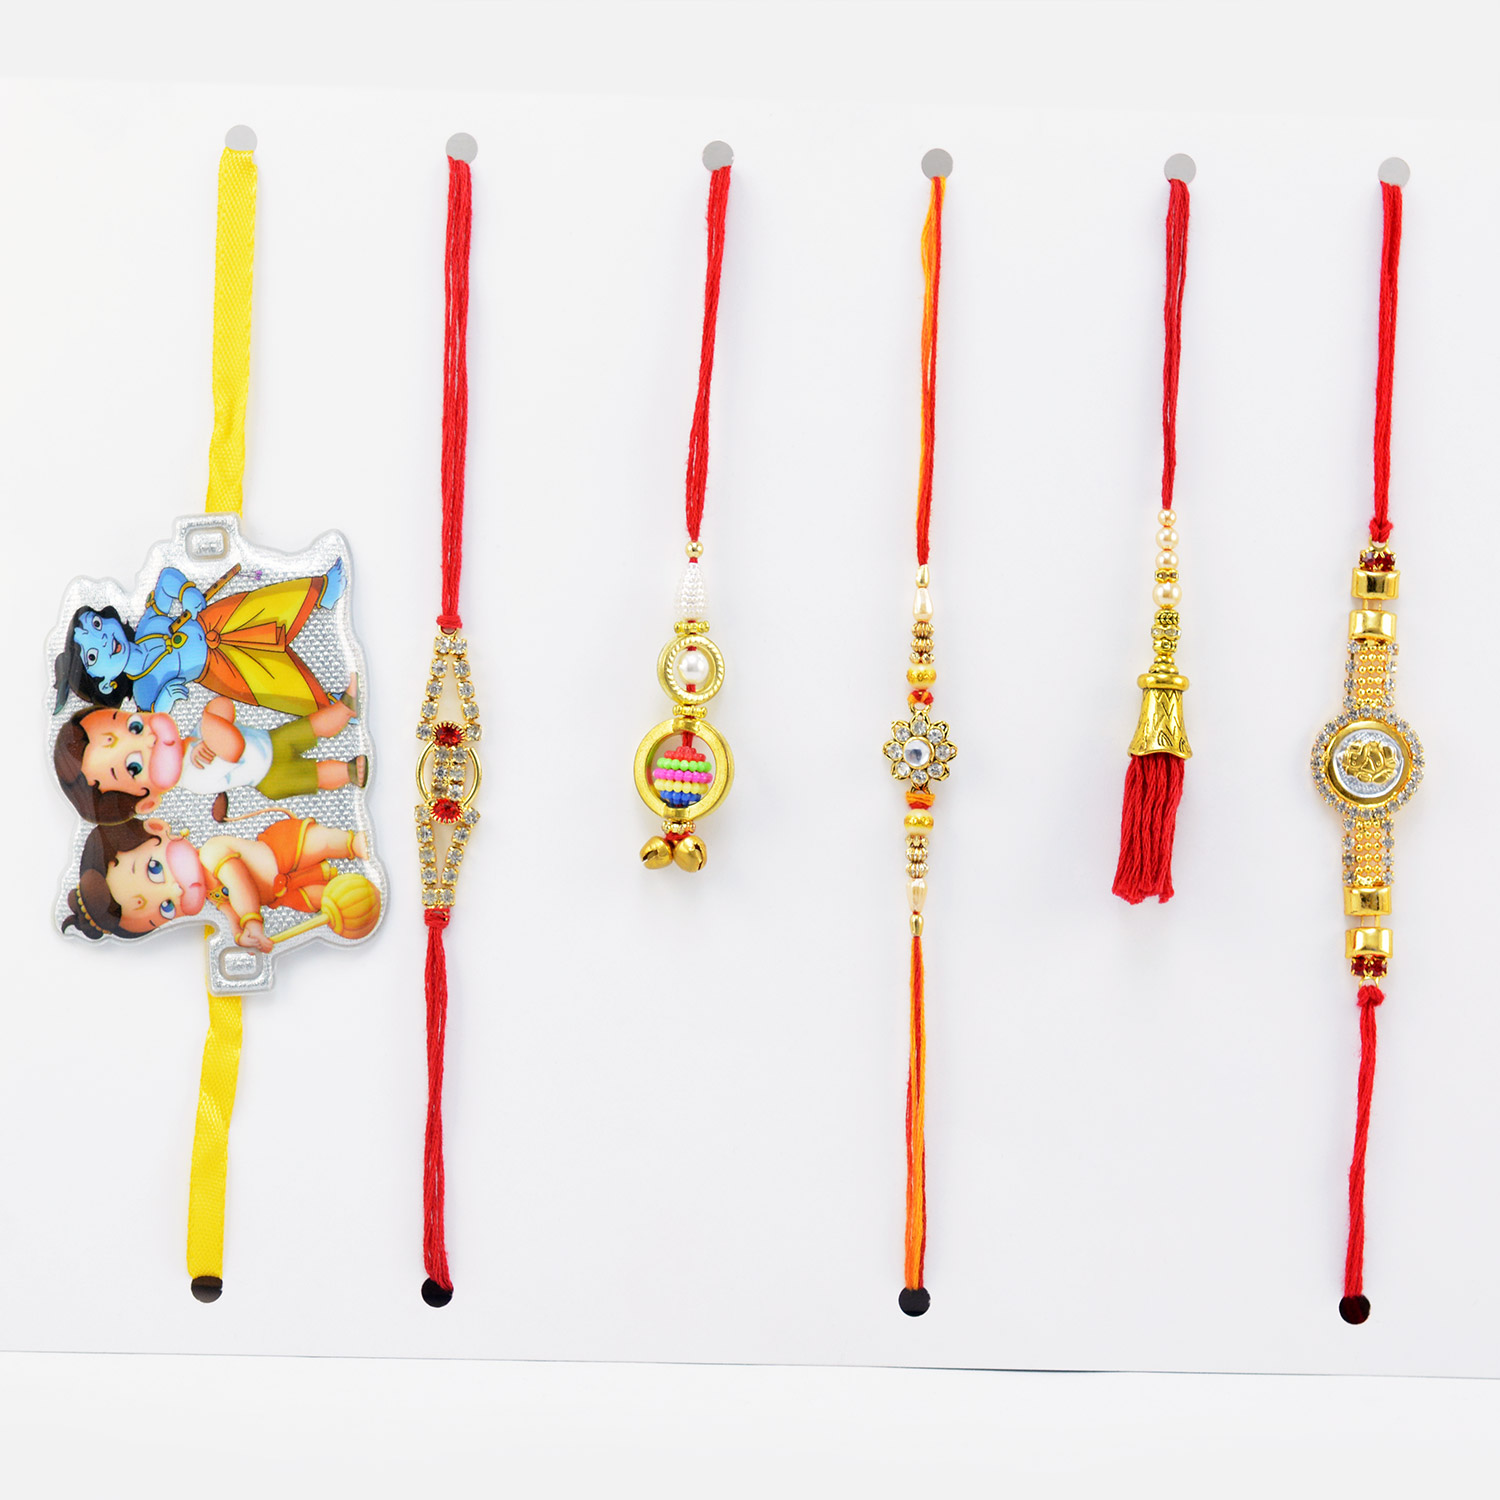 Magnificent Combo of Jewel and Golden color Rakhis 3 Brother 2 Ladies and a Kid